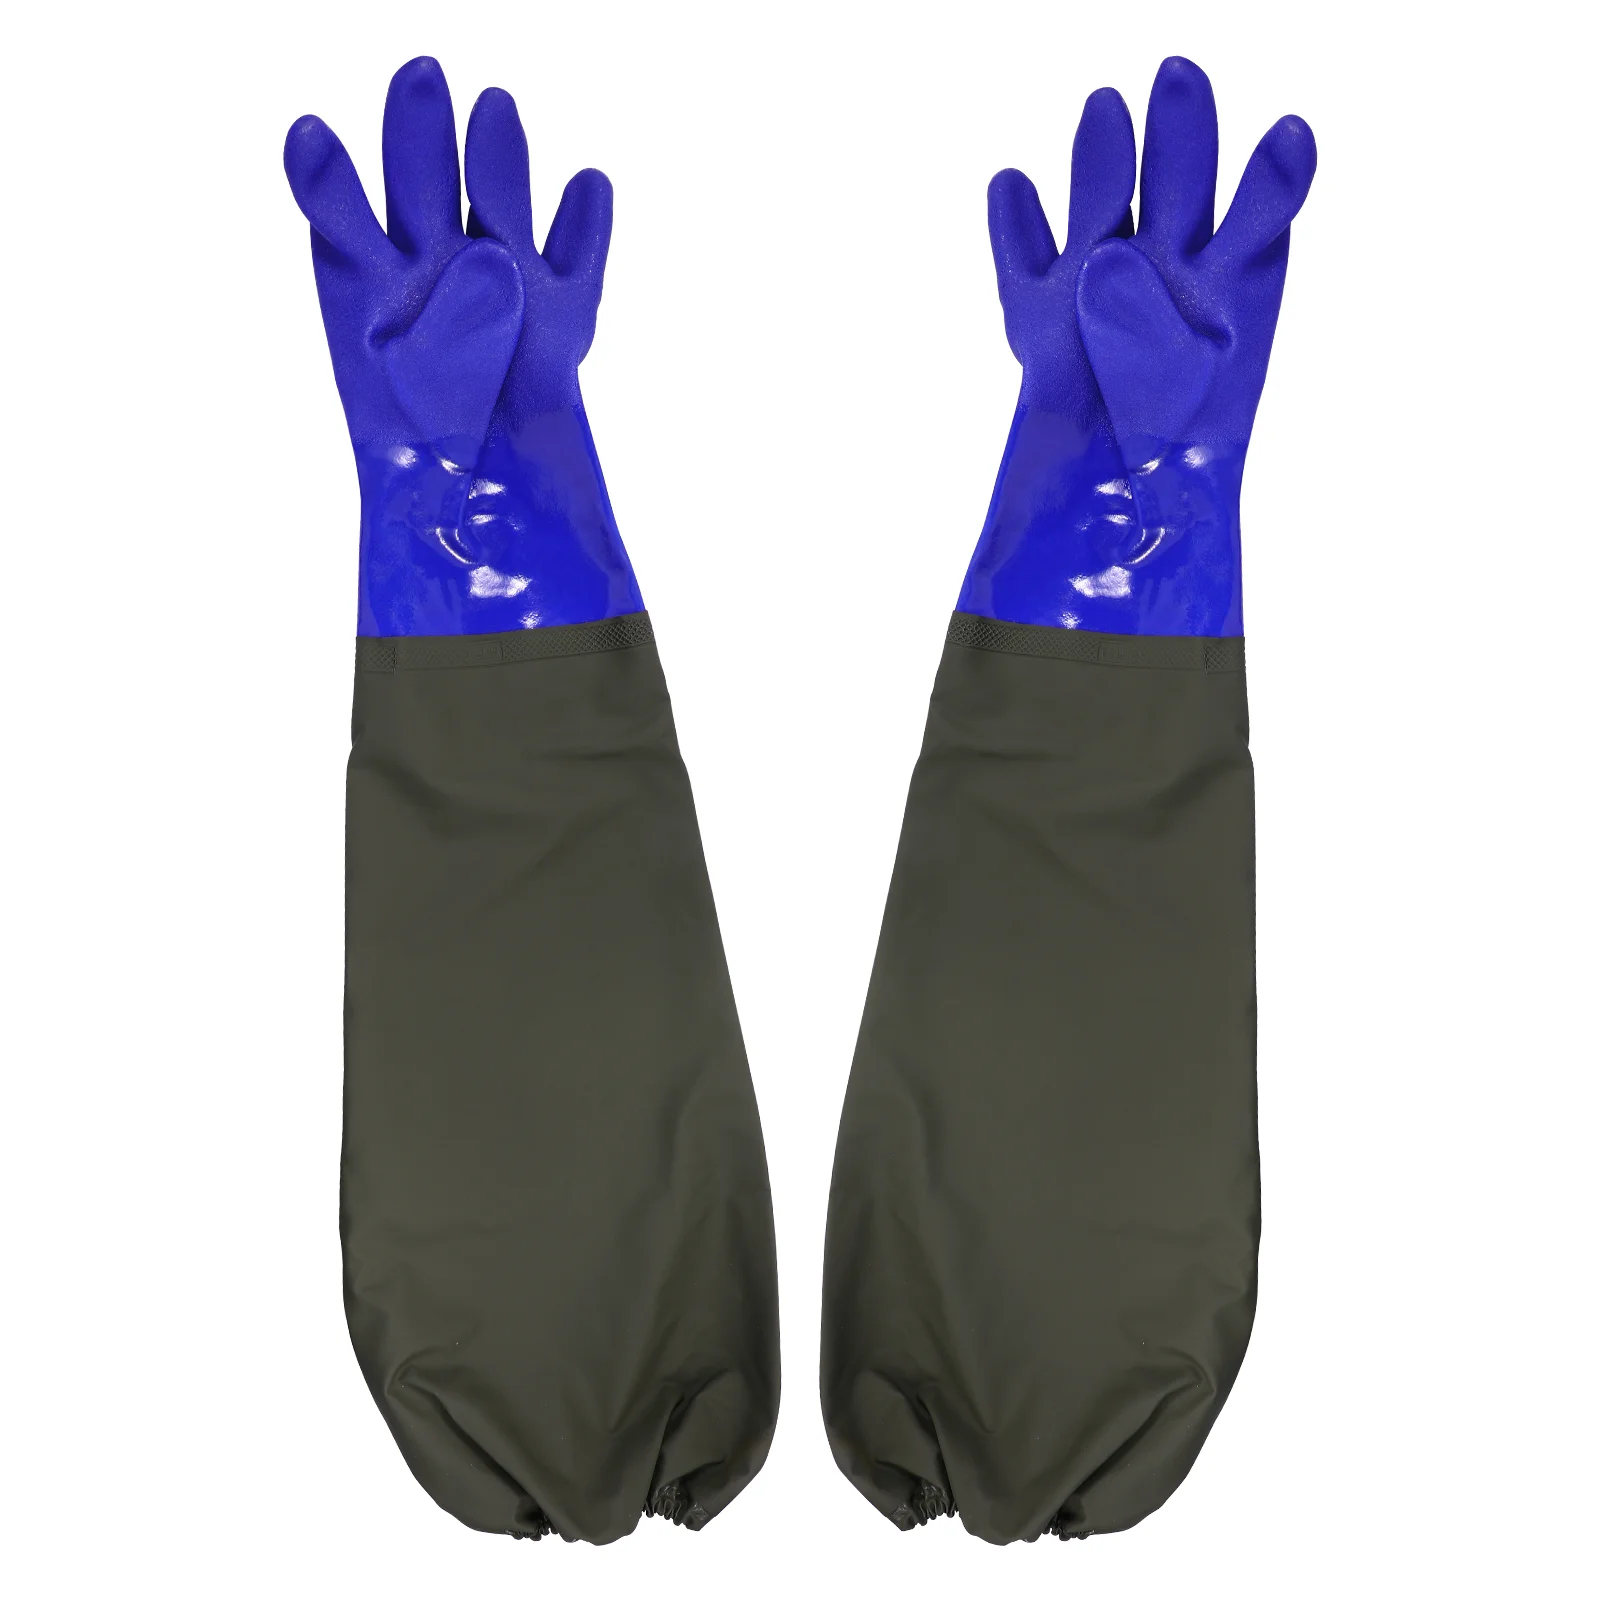 

1 Pair Waterproof Aquarium Gloves Long Rubber Gloves Fish Tank Water Change Gloves Cleaning Gloves Fishing For